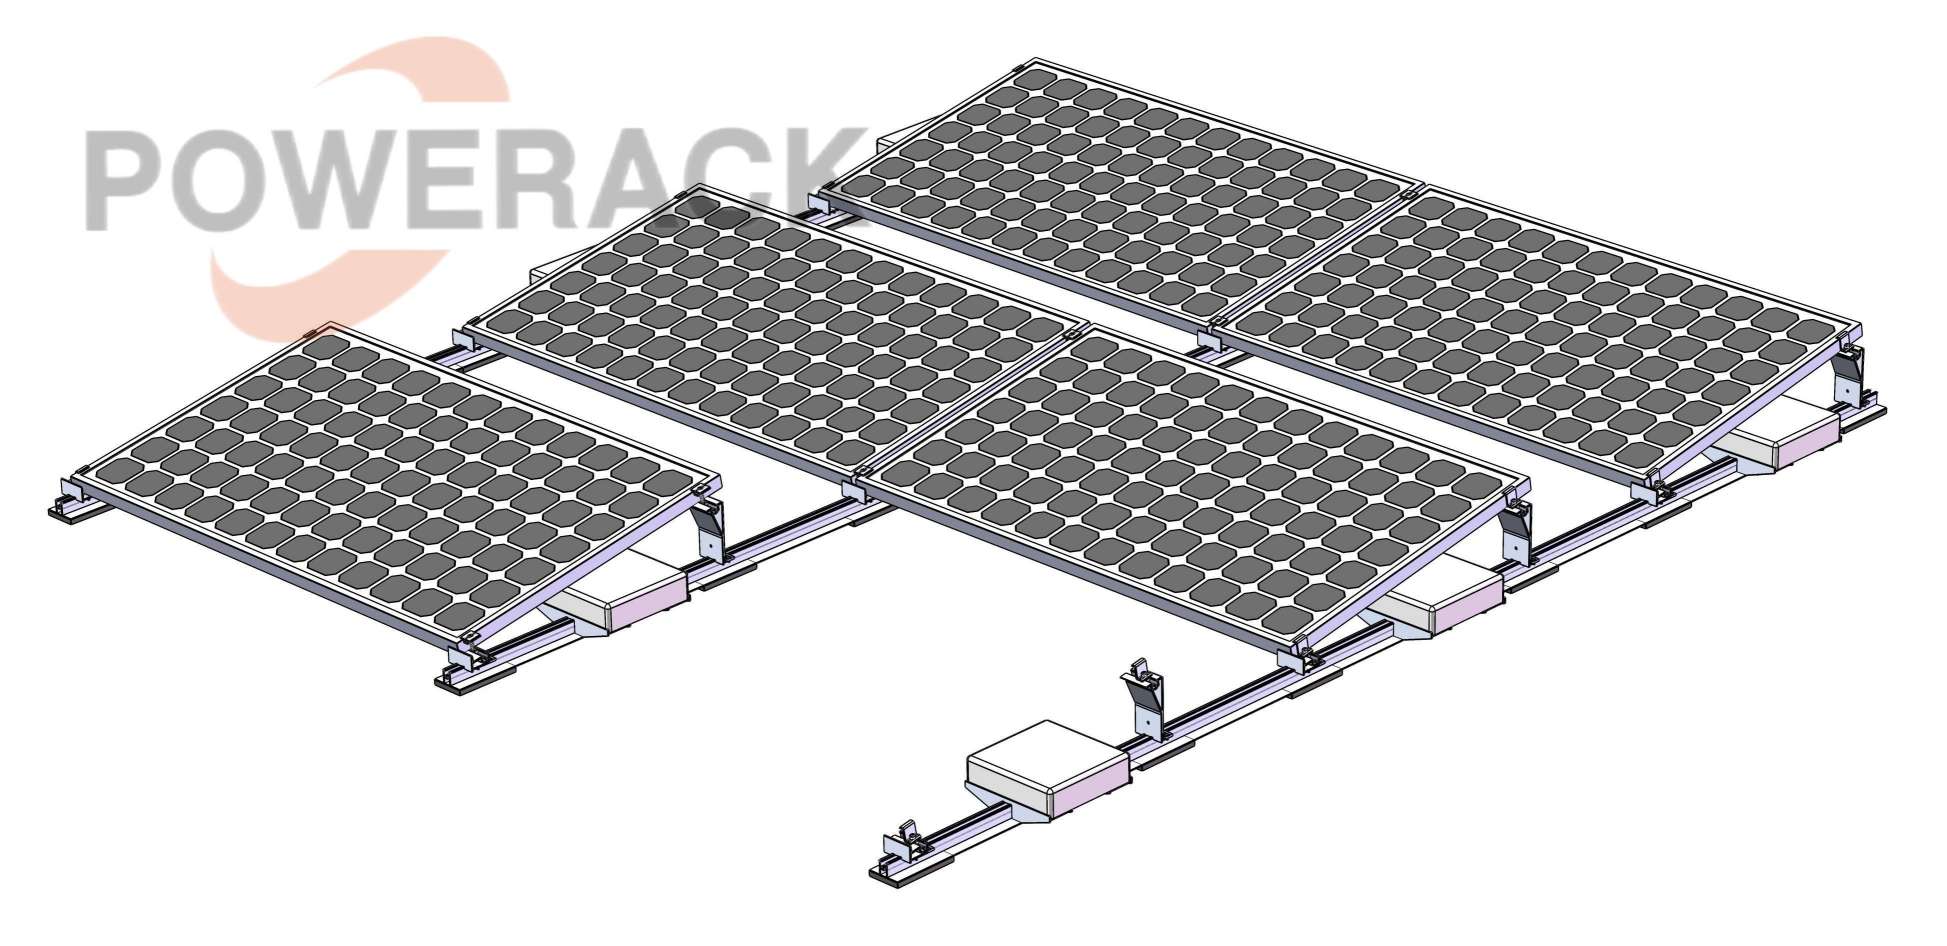 Flat Roof Ballasted Solar Racking System